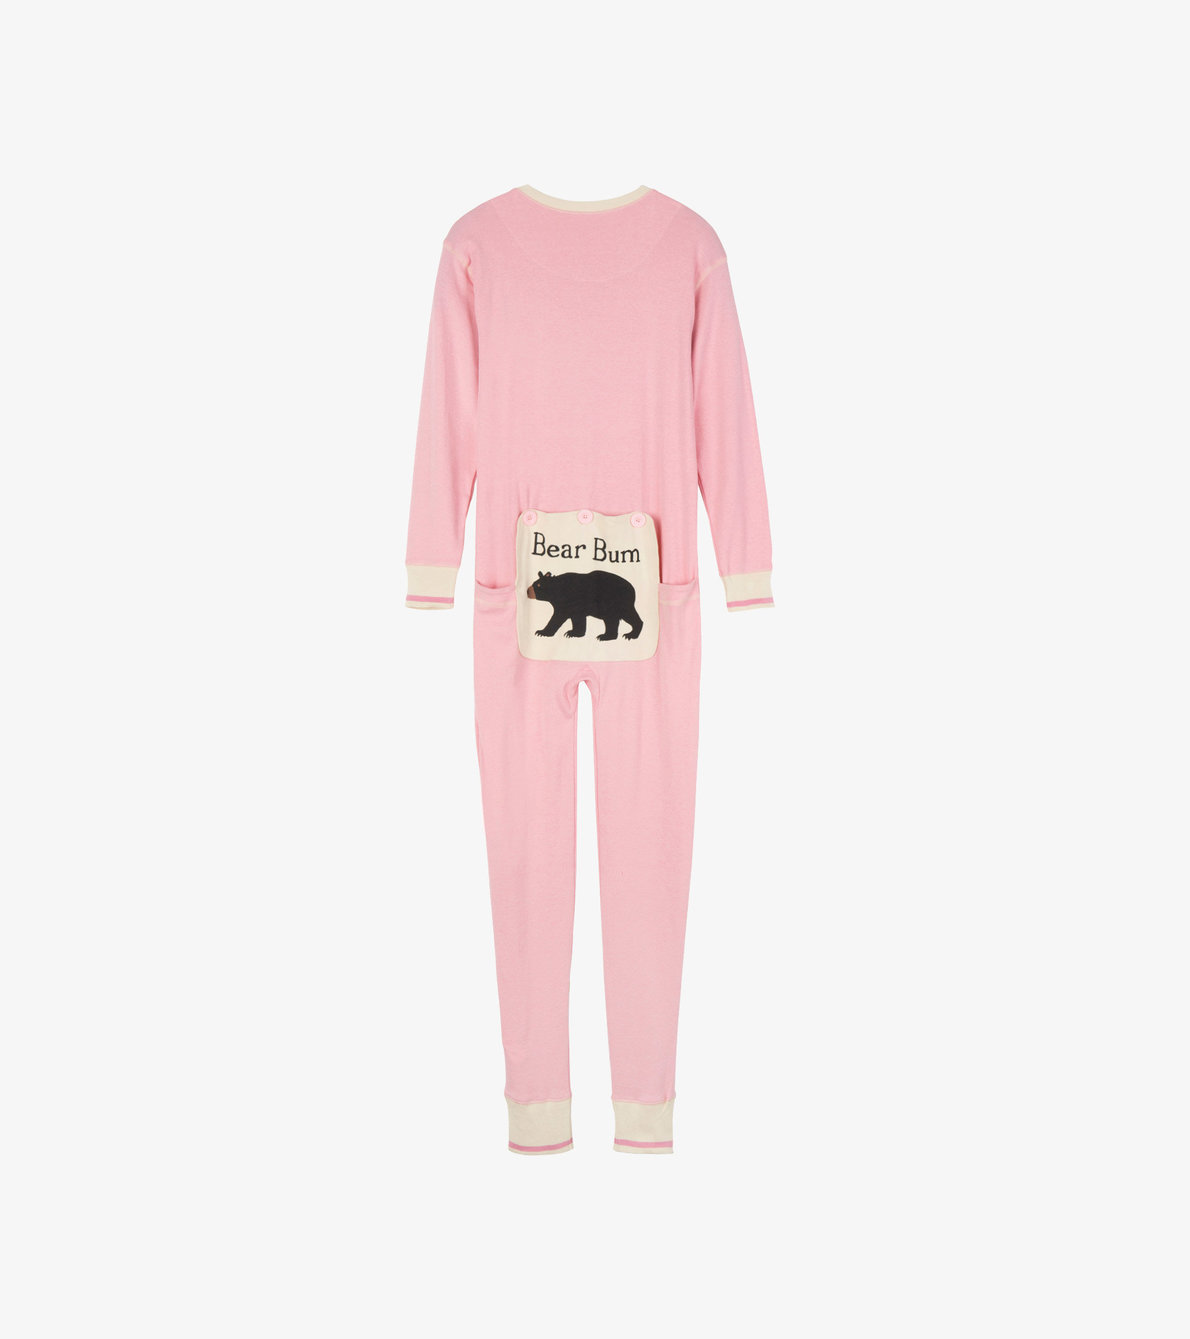 View larger image of Pink Bear Bum Adult Union Suit